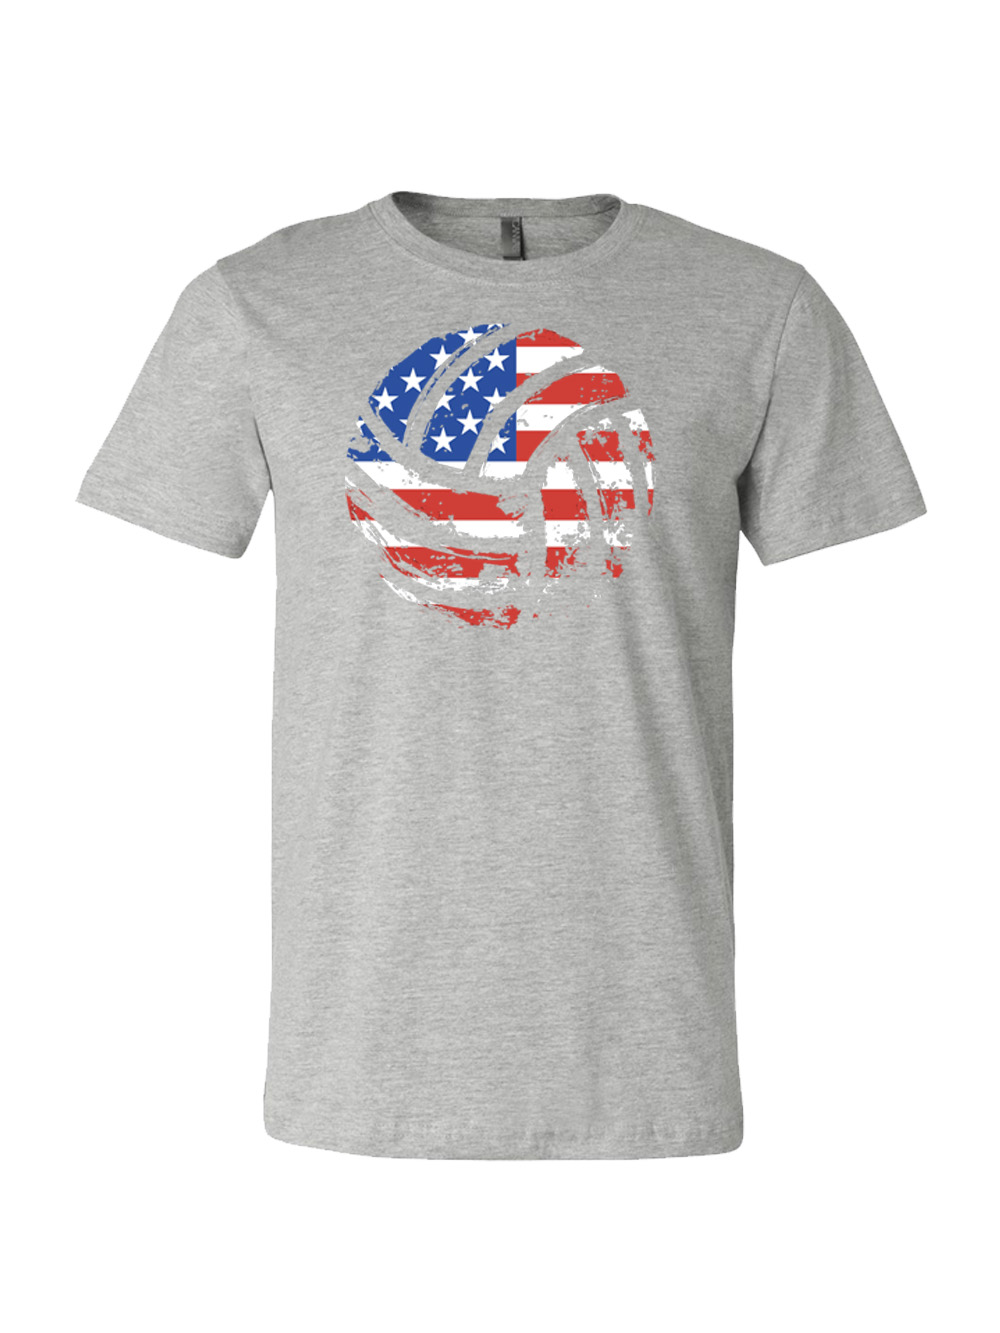 NEW VB Flag T-Shirt | Midwest Volleyball Warehouse